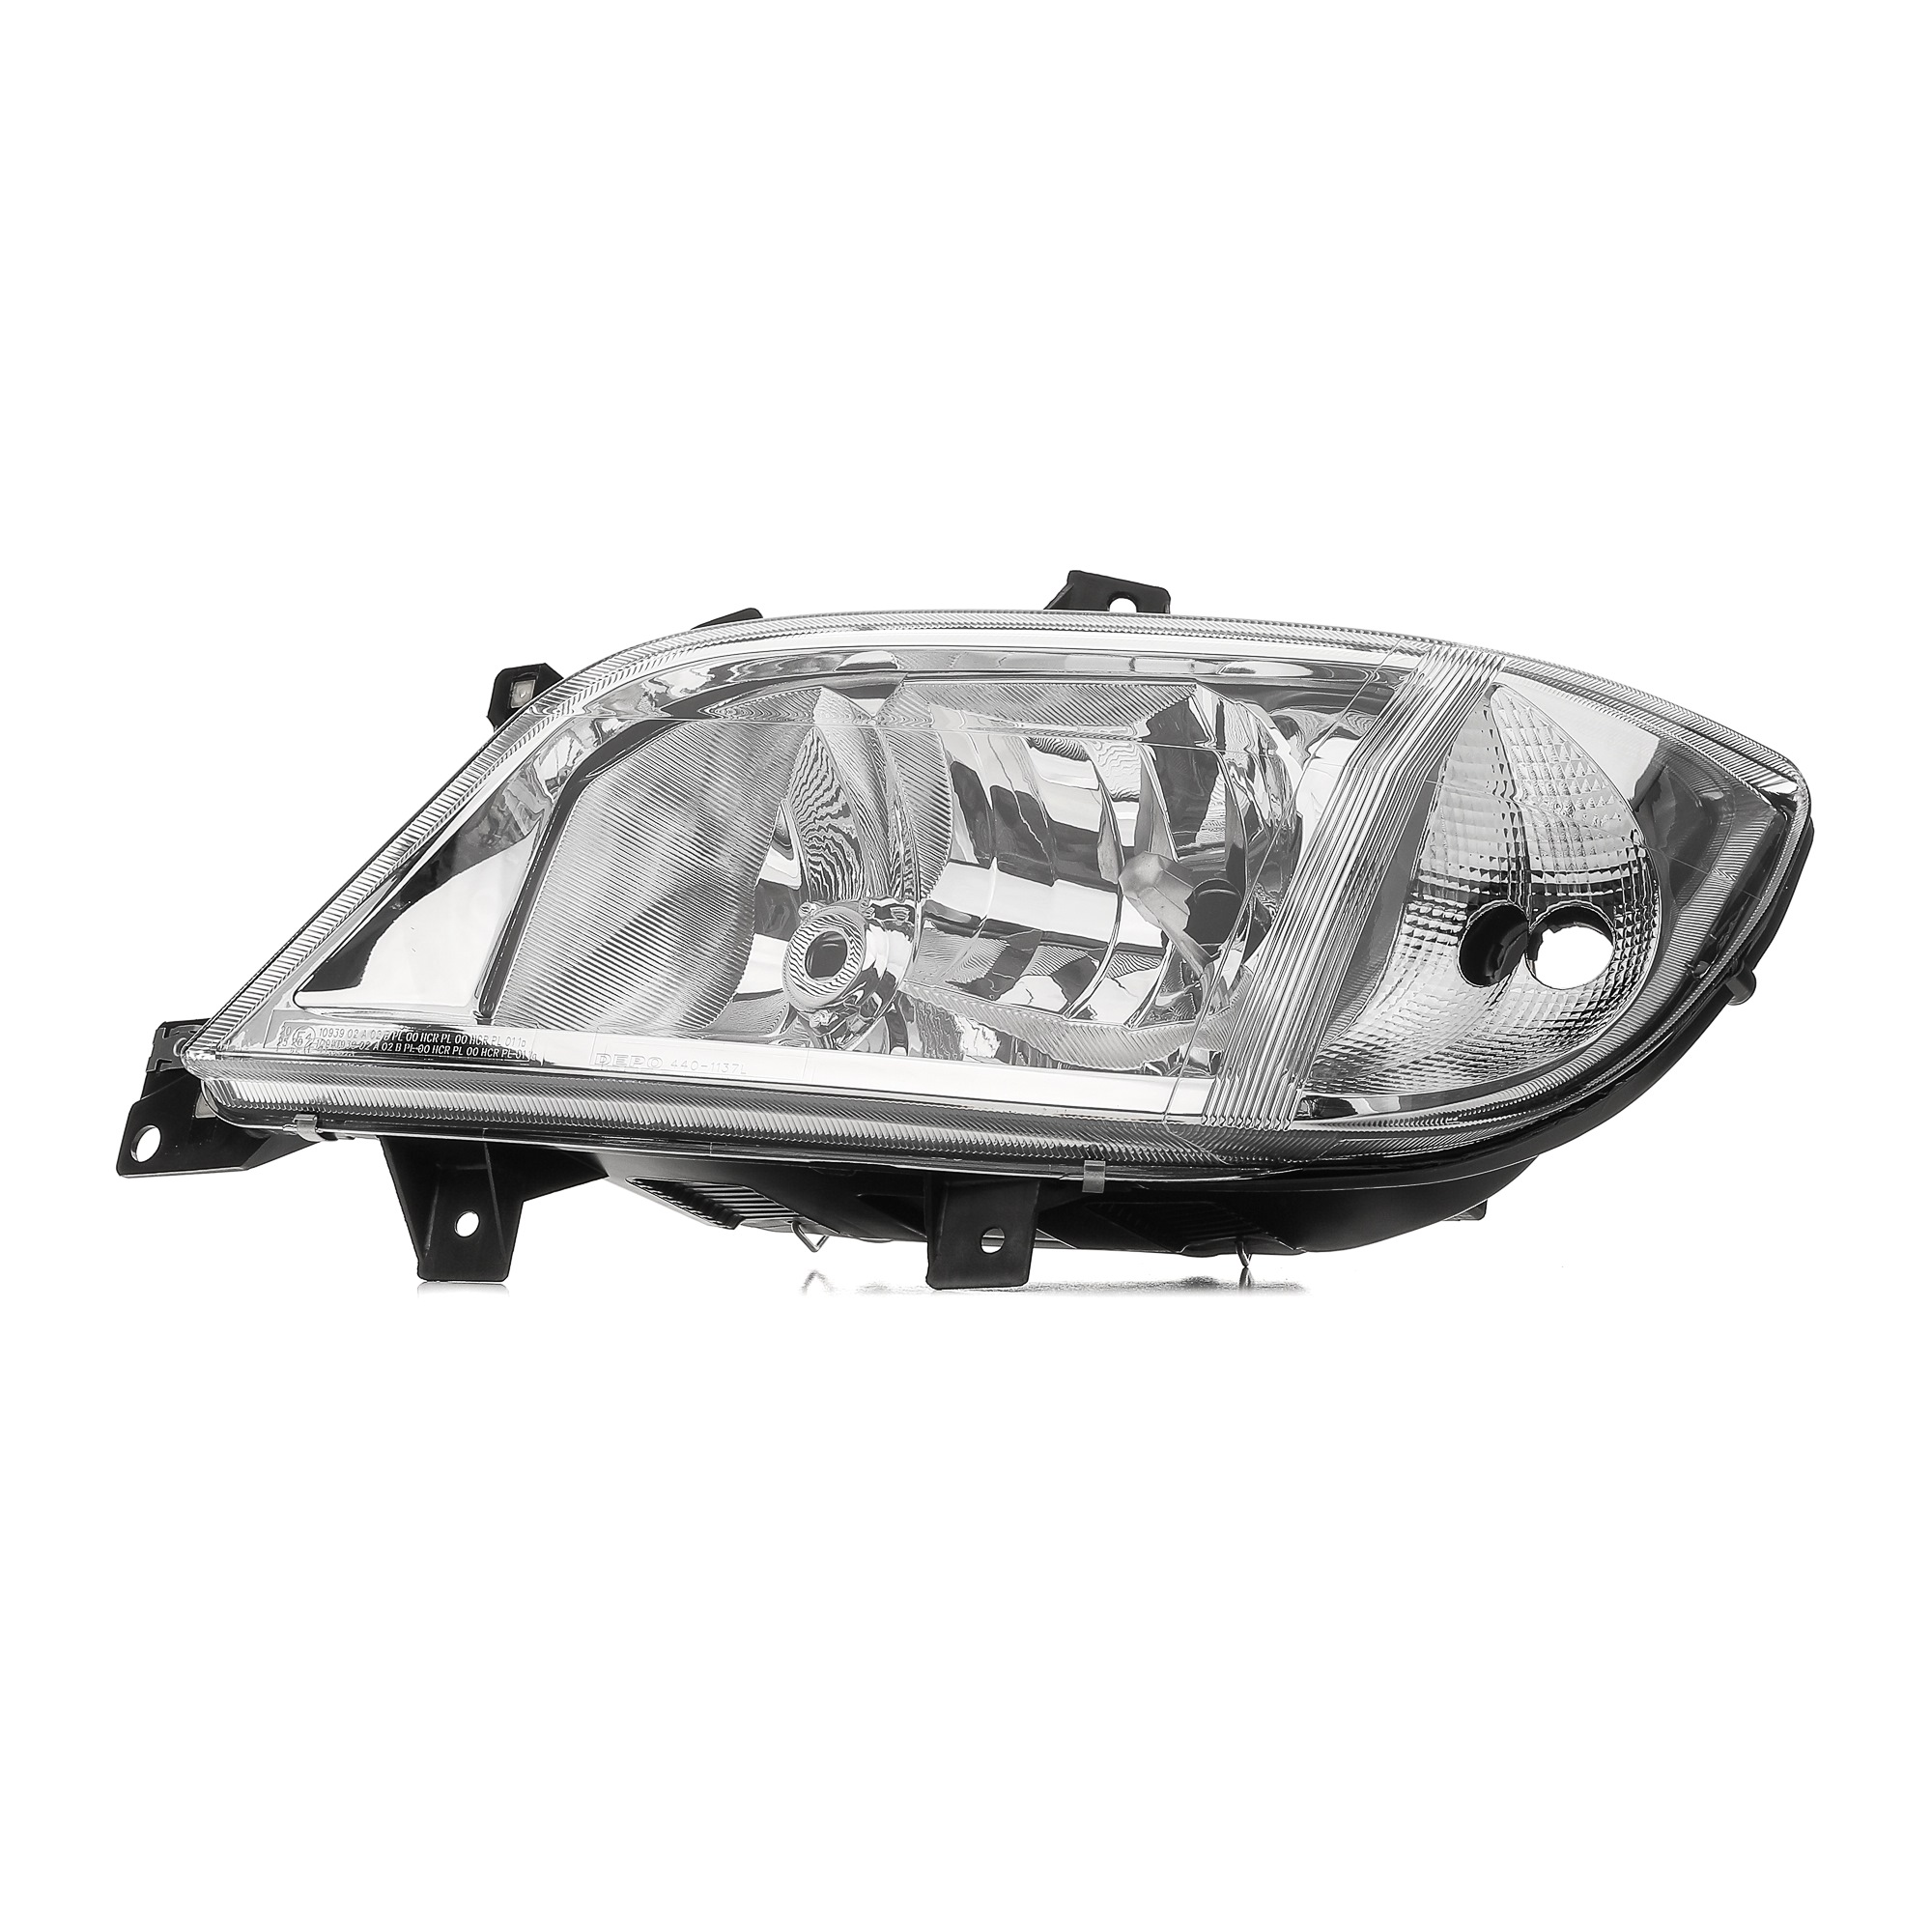 ABAKUS 440-1137L-LD-EM Headlight Left, H3, H7, Crystal clear, Crystal clear, with indicator, without front fog light, for right-hand traffic, with bulb holder, without motor for headlamp levelling, PK22s, PX26d